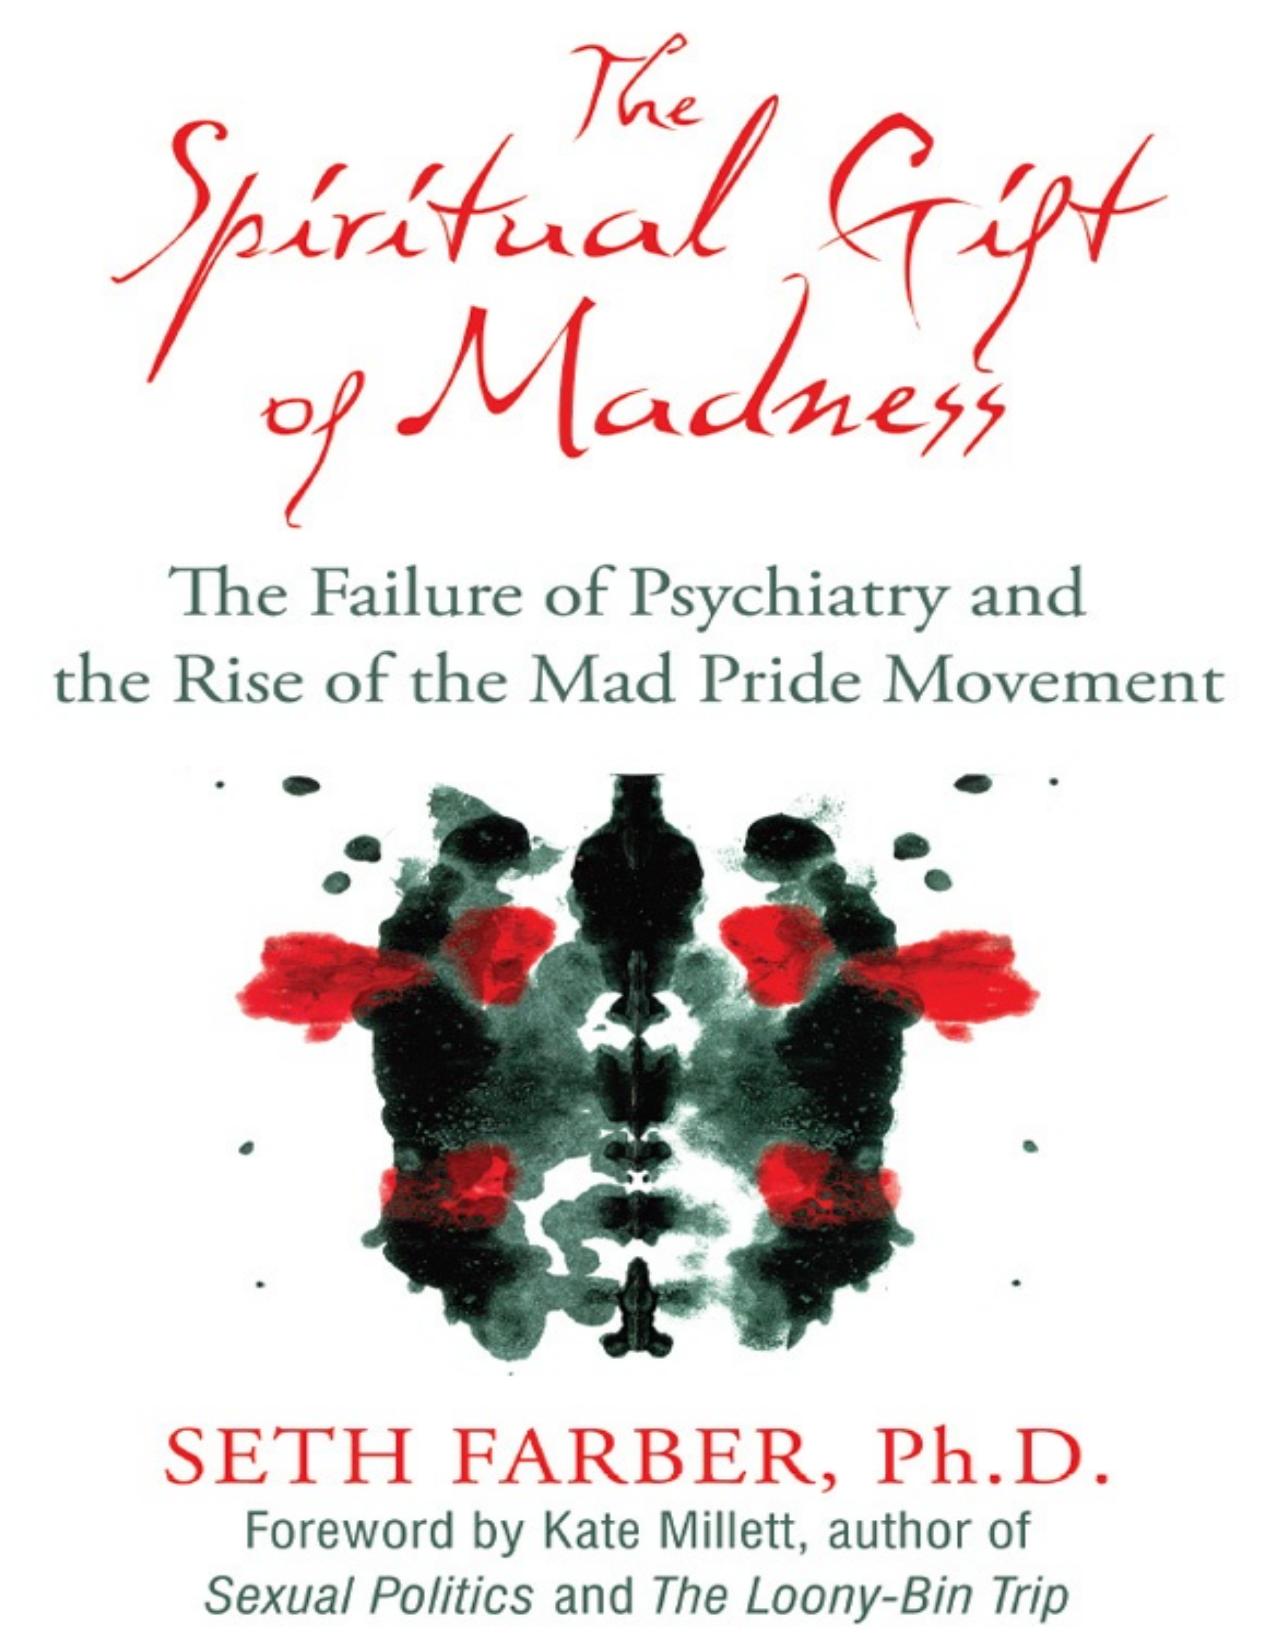 The Spiritual Gift of Madness: The Failure of Psychiatry and the Rise of the Mad Pride Movement - PDFDrive.com